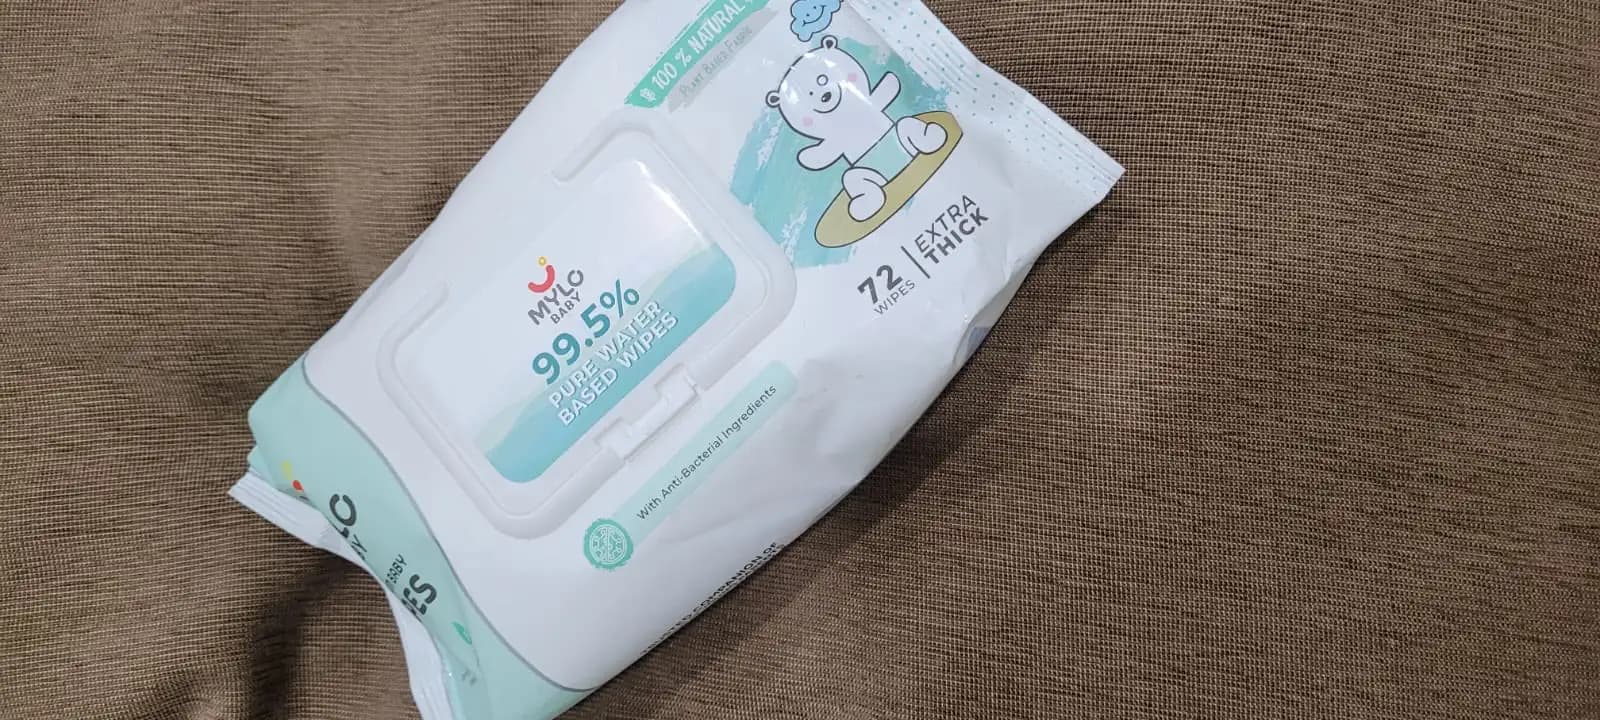 Mylo Baby 99.5% Ultra Pure Water- Based Premium Wipes with 100% Extra Thick Cotton Fabric with Lid - Pack of 3